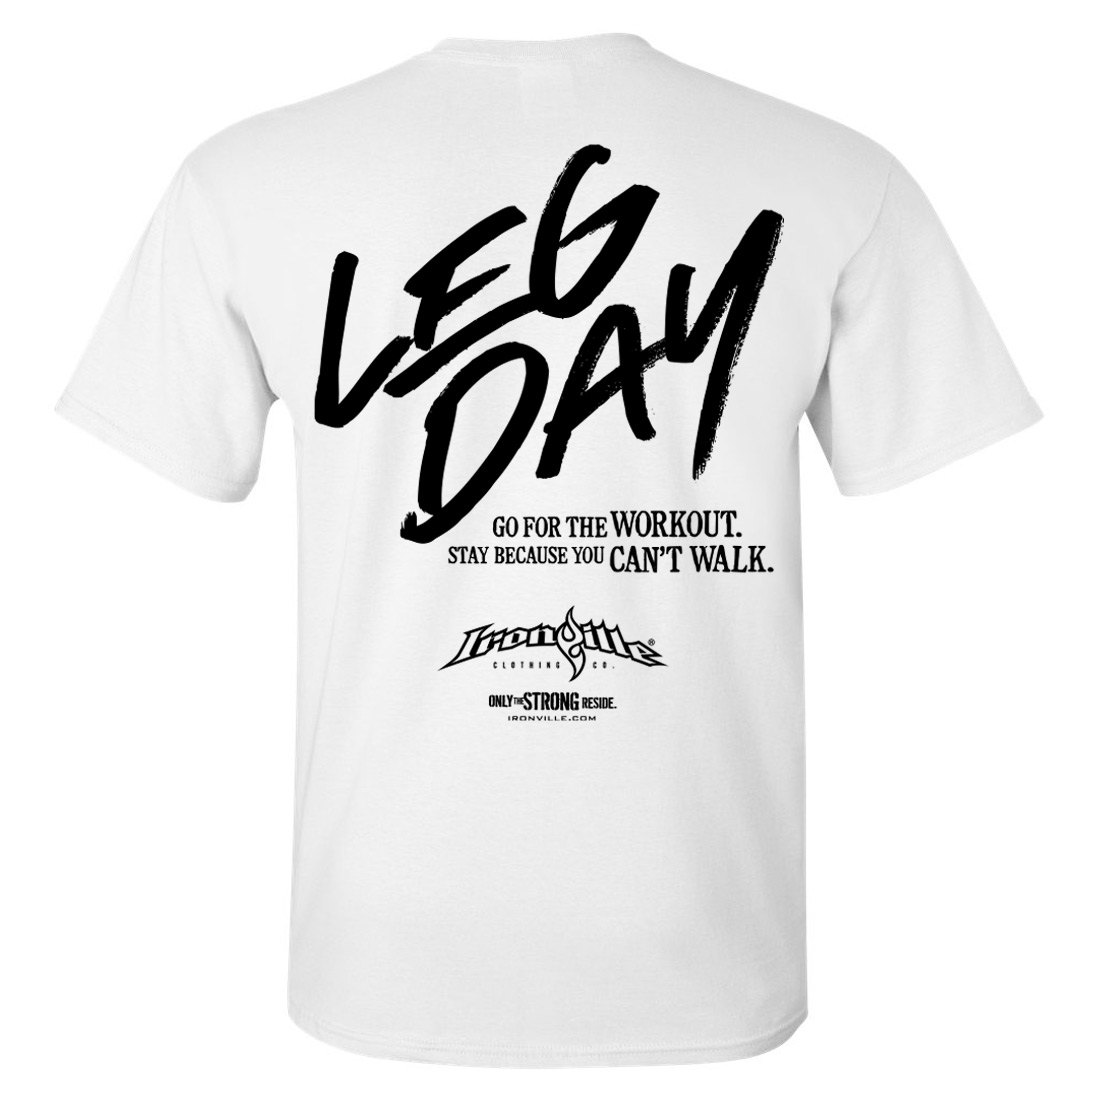 Leg Day Is Coming T-Shirt